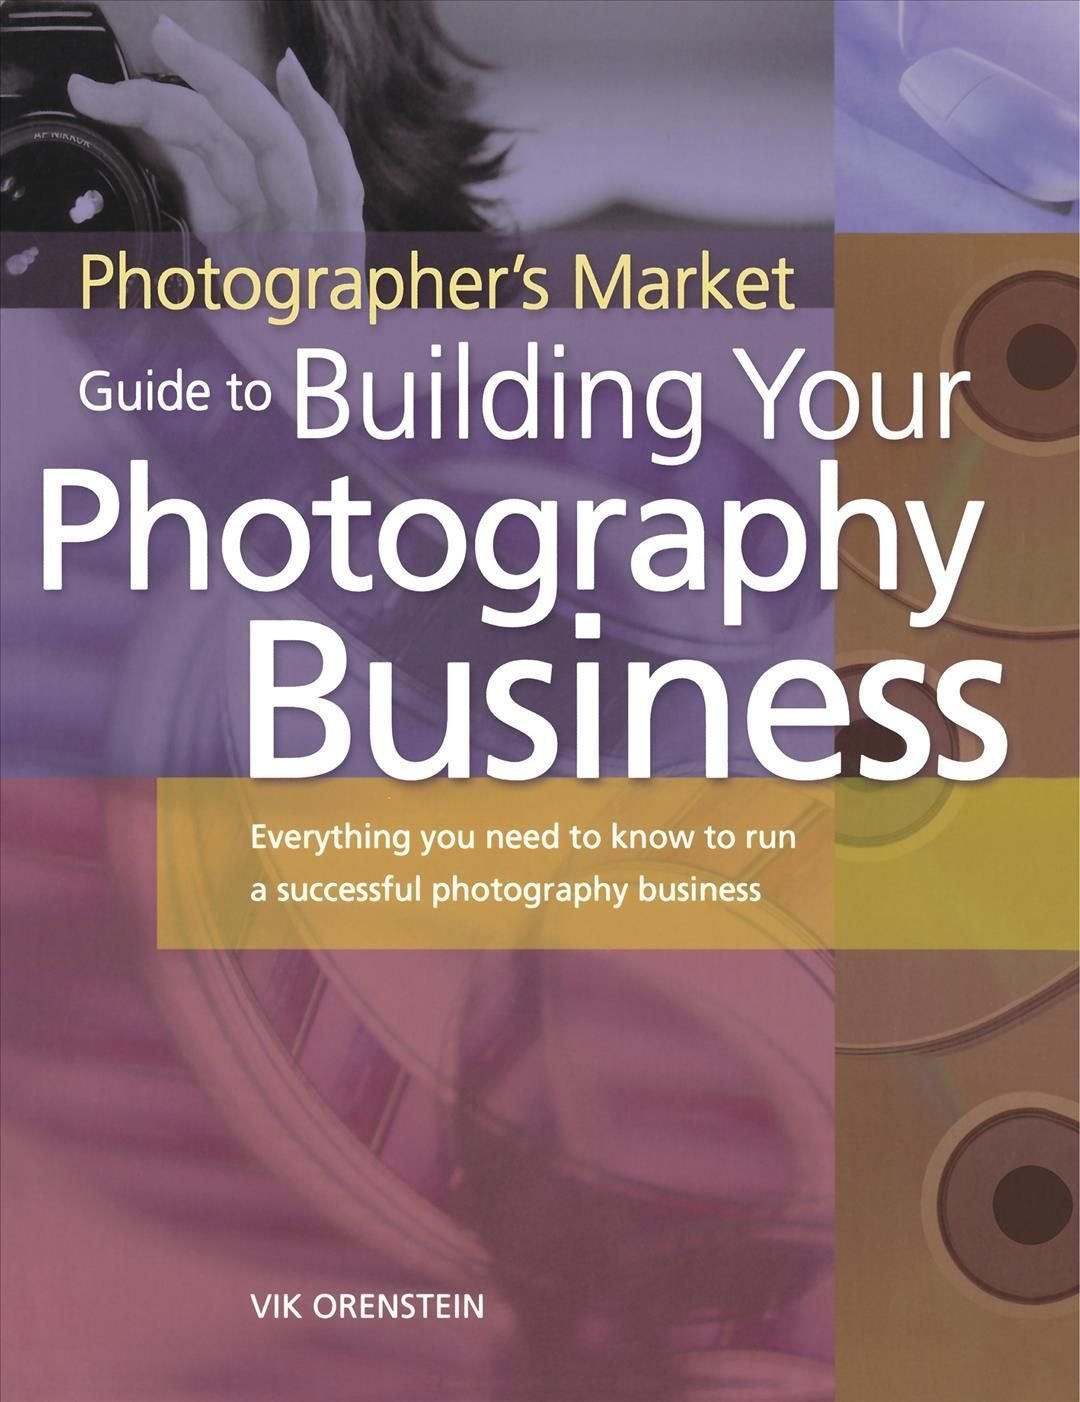 Photographer's Market Guide to Building Your Photography Business